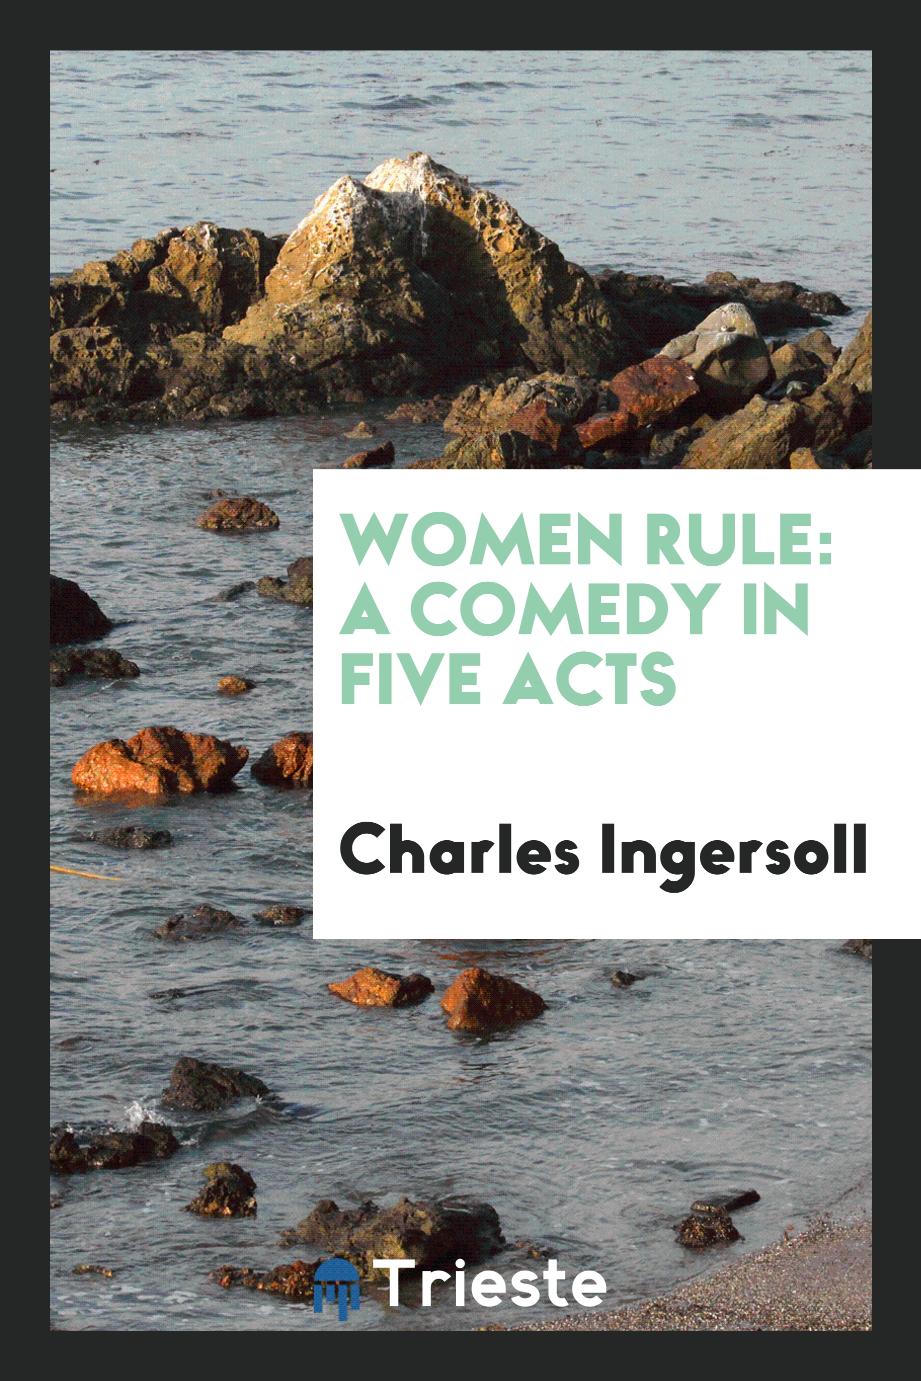 Women Rule: A Comedy in five acts